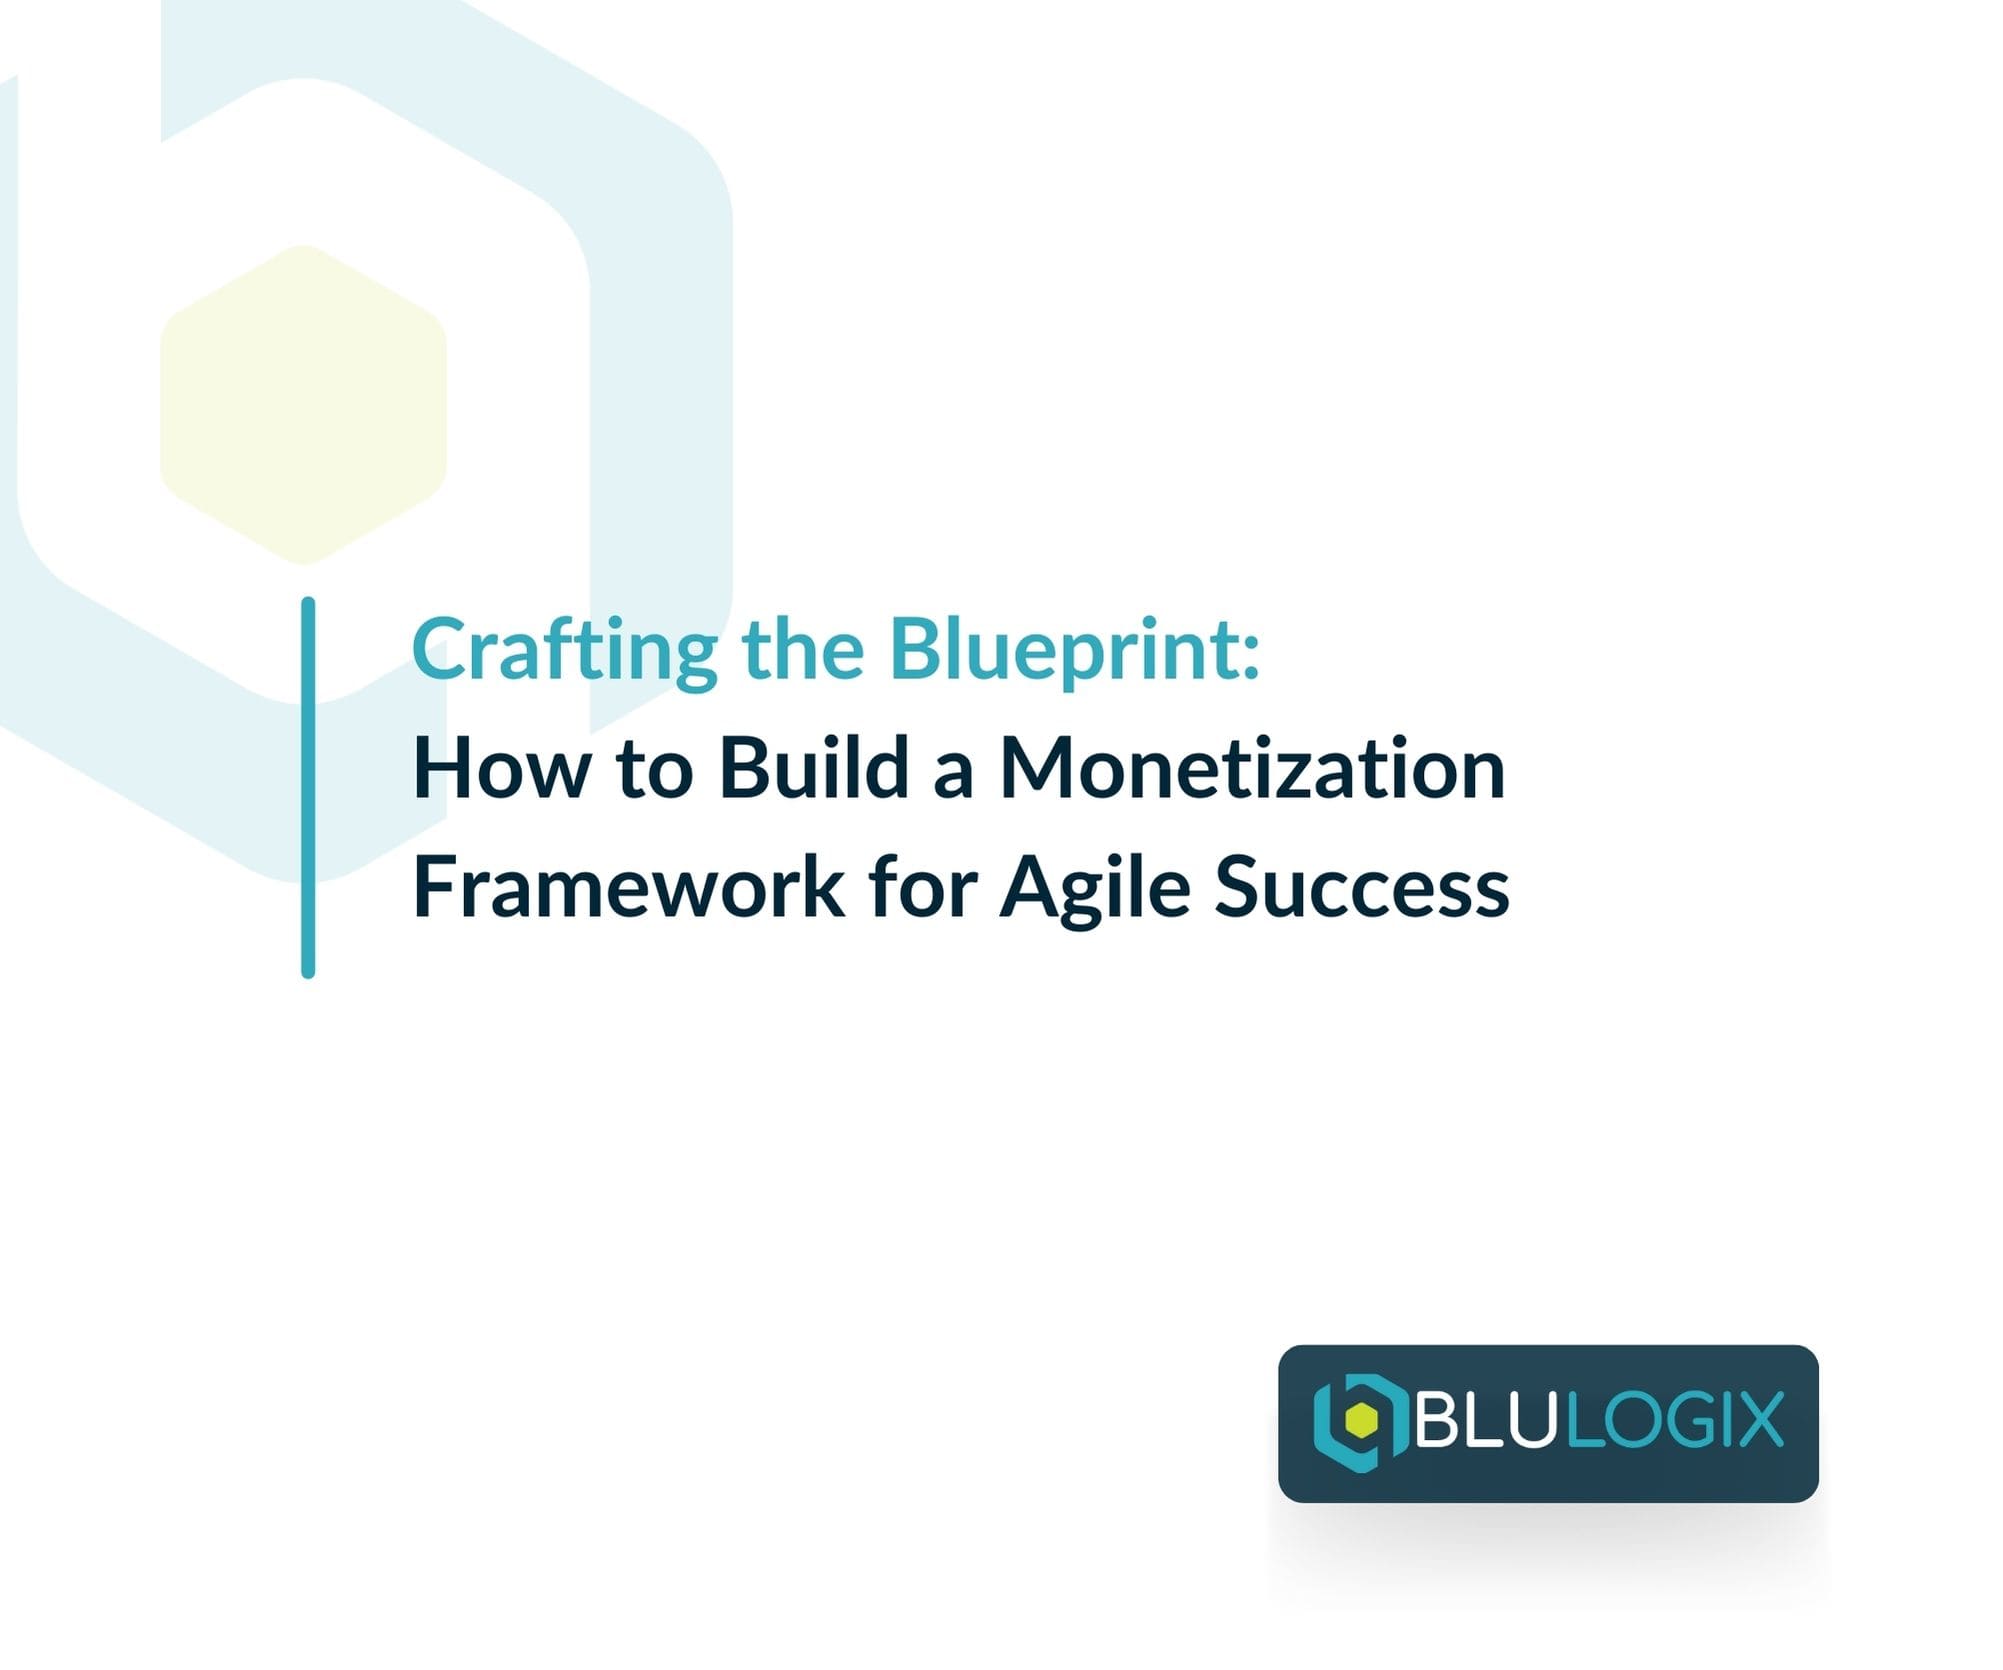 Crafting the Blueprint How to Build a Monetization Framework for Agile Success